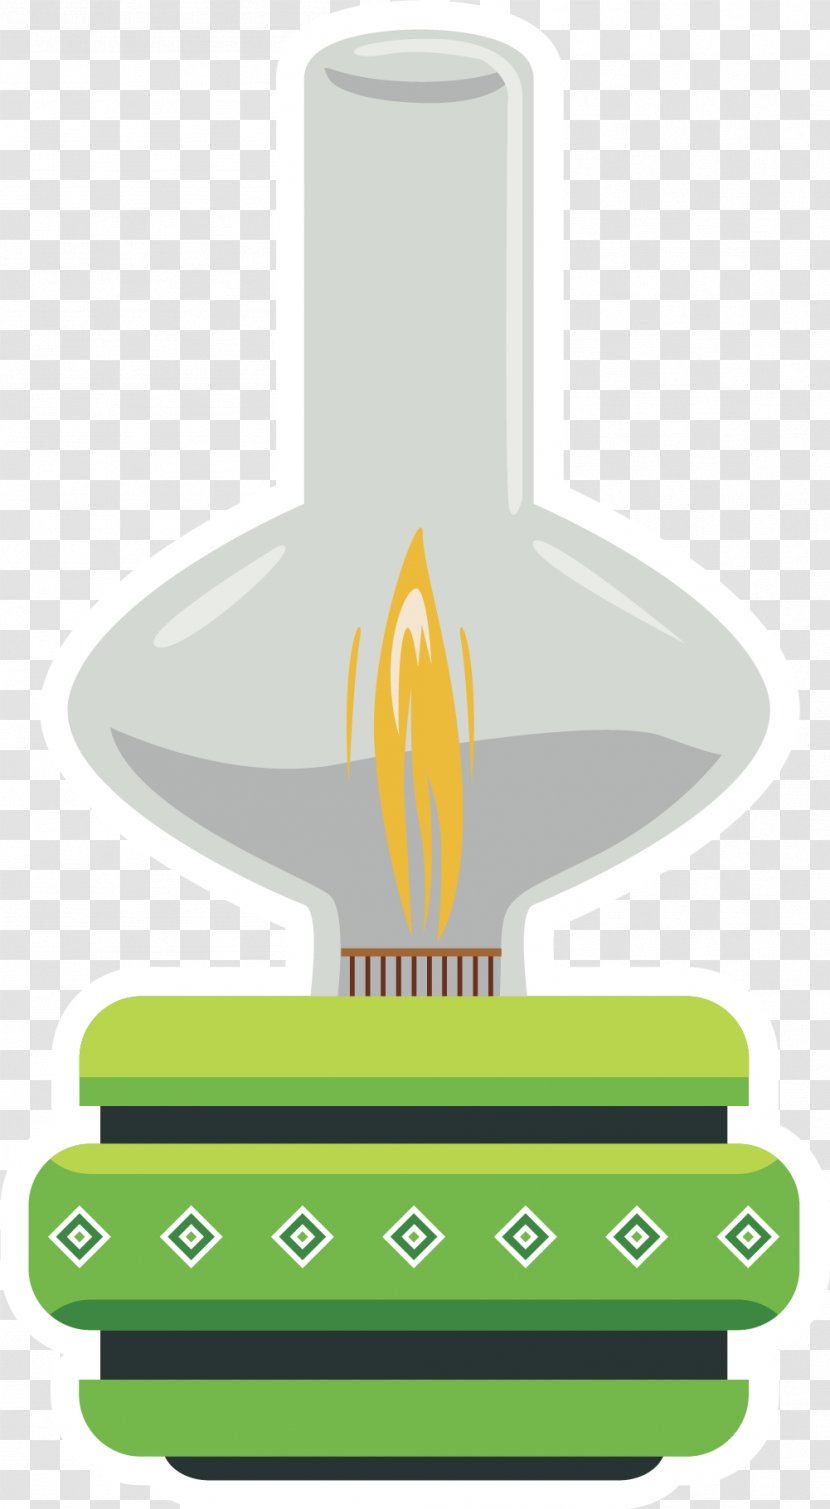 Lighthouse Of La Serena Cartoon Drawing - Simple Oil Lamp For Eid UL Fitr Transparent PNG